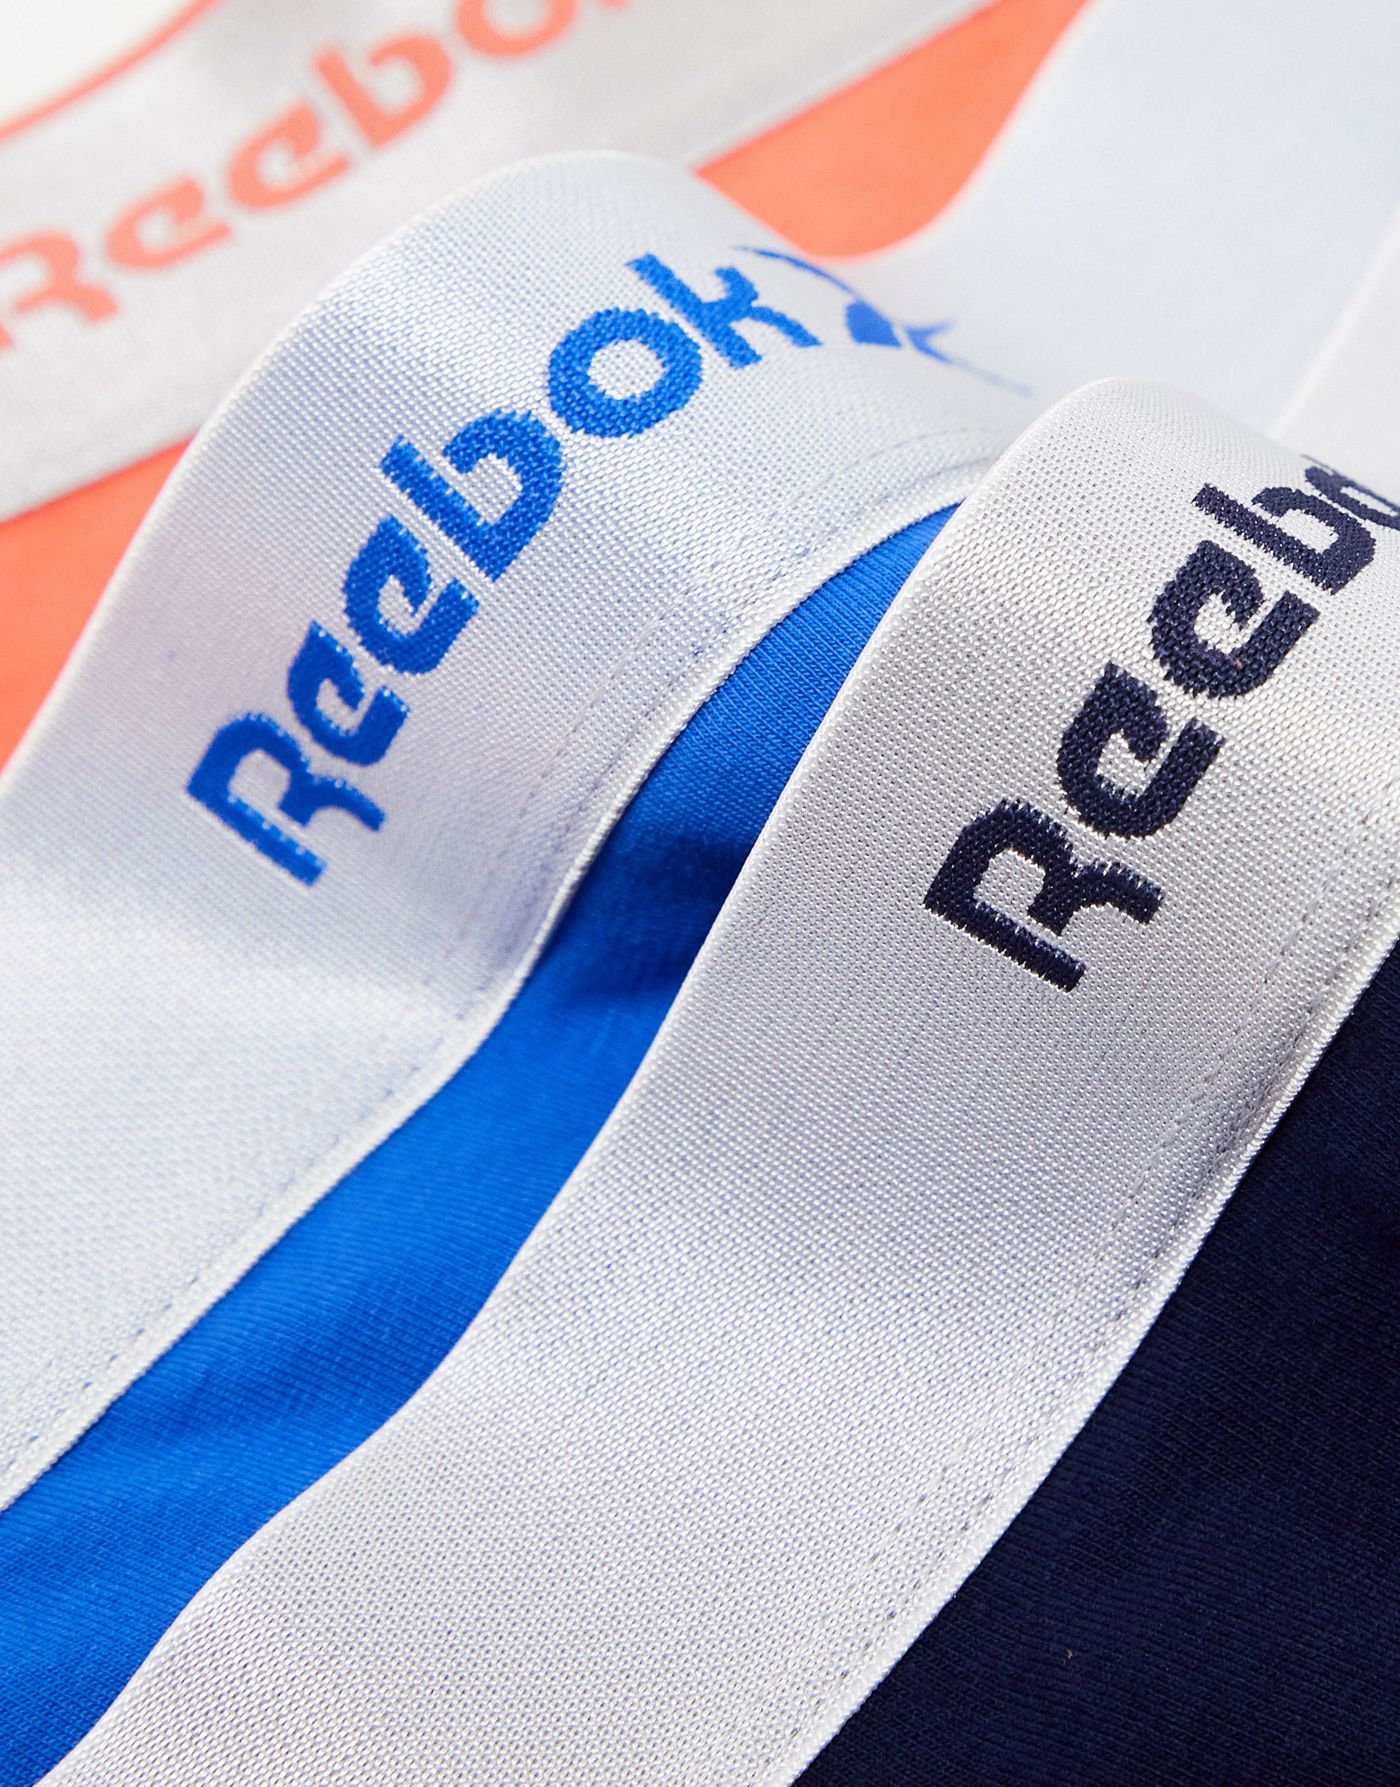 Reebok lacy 3 pack briefs with shine banding in blue navy and orange